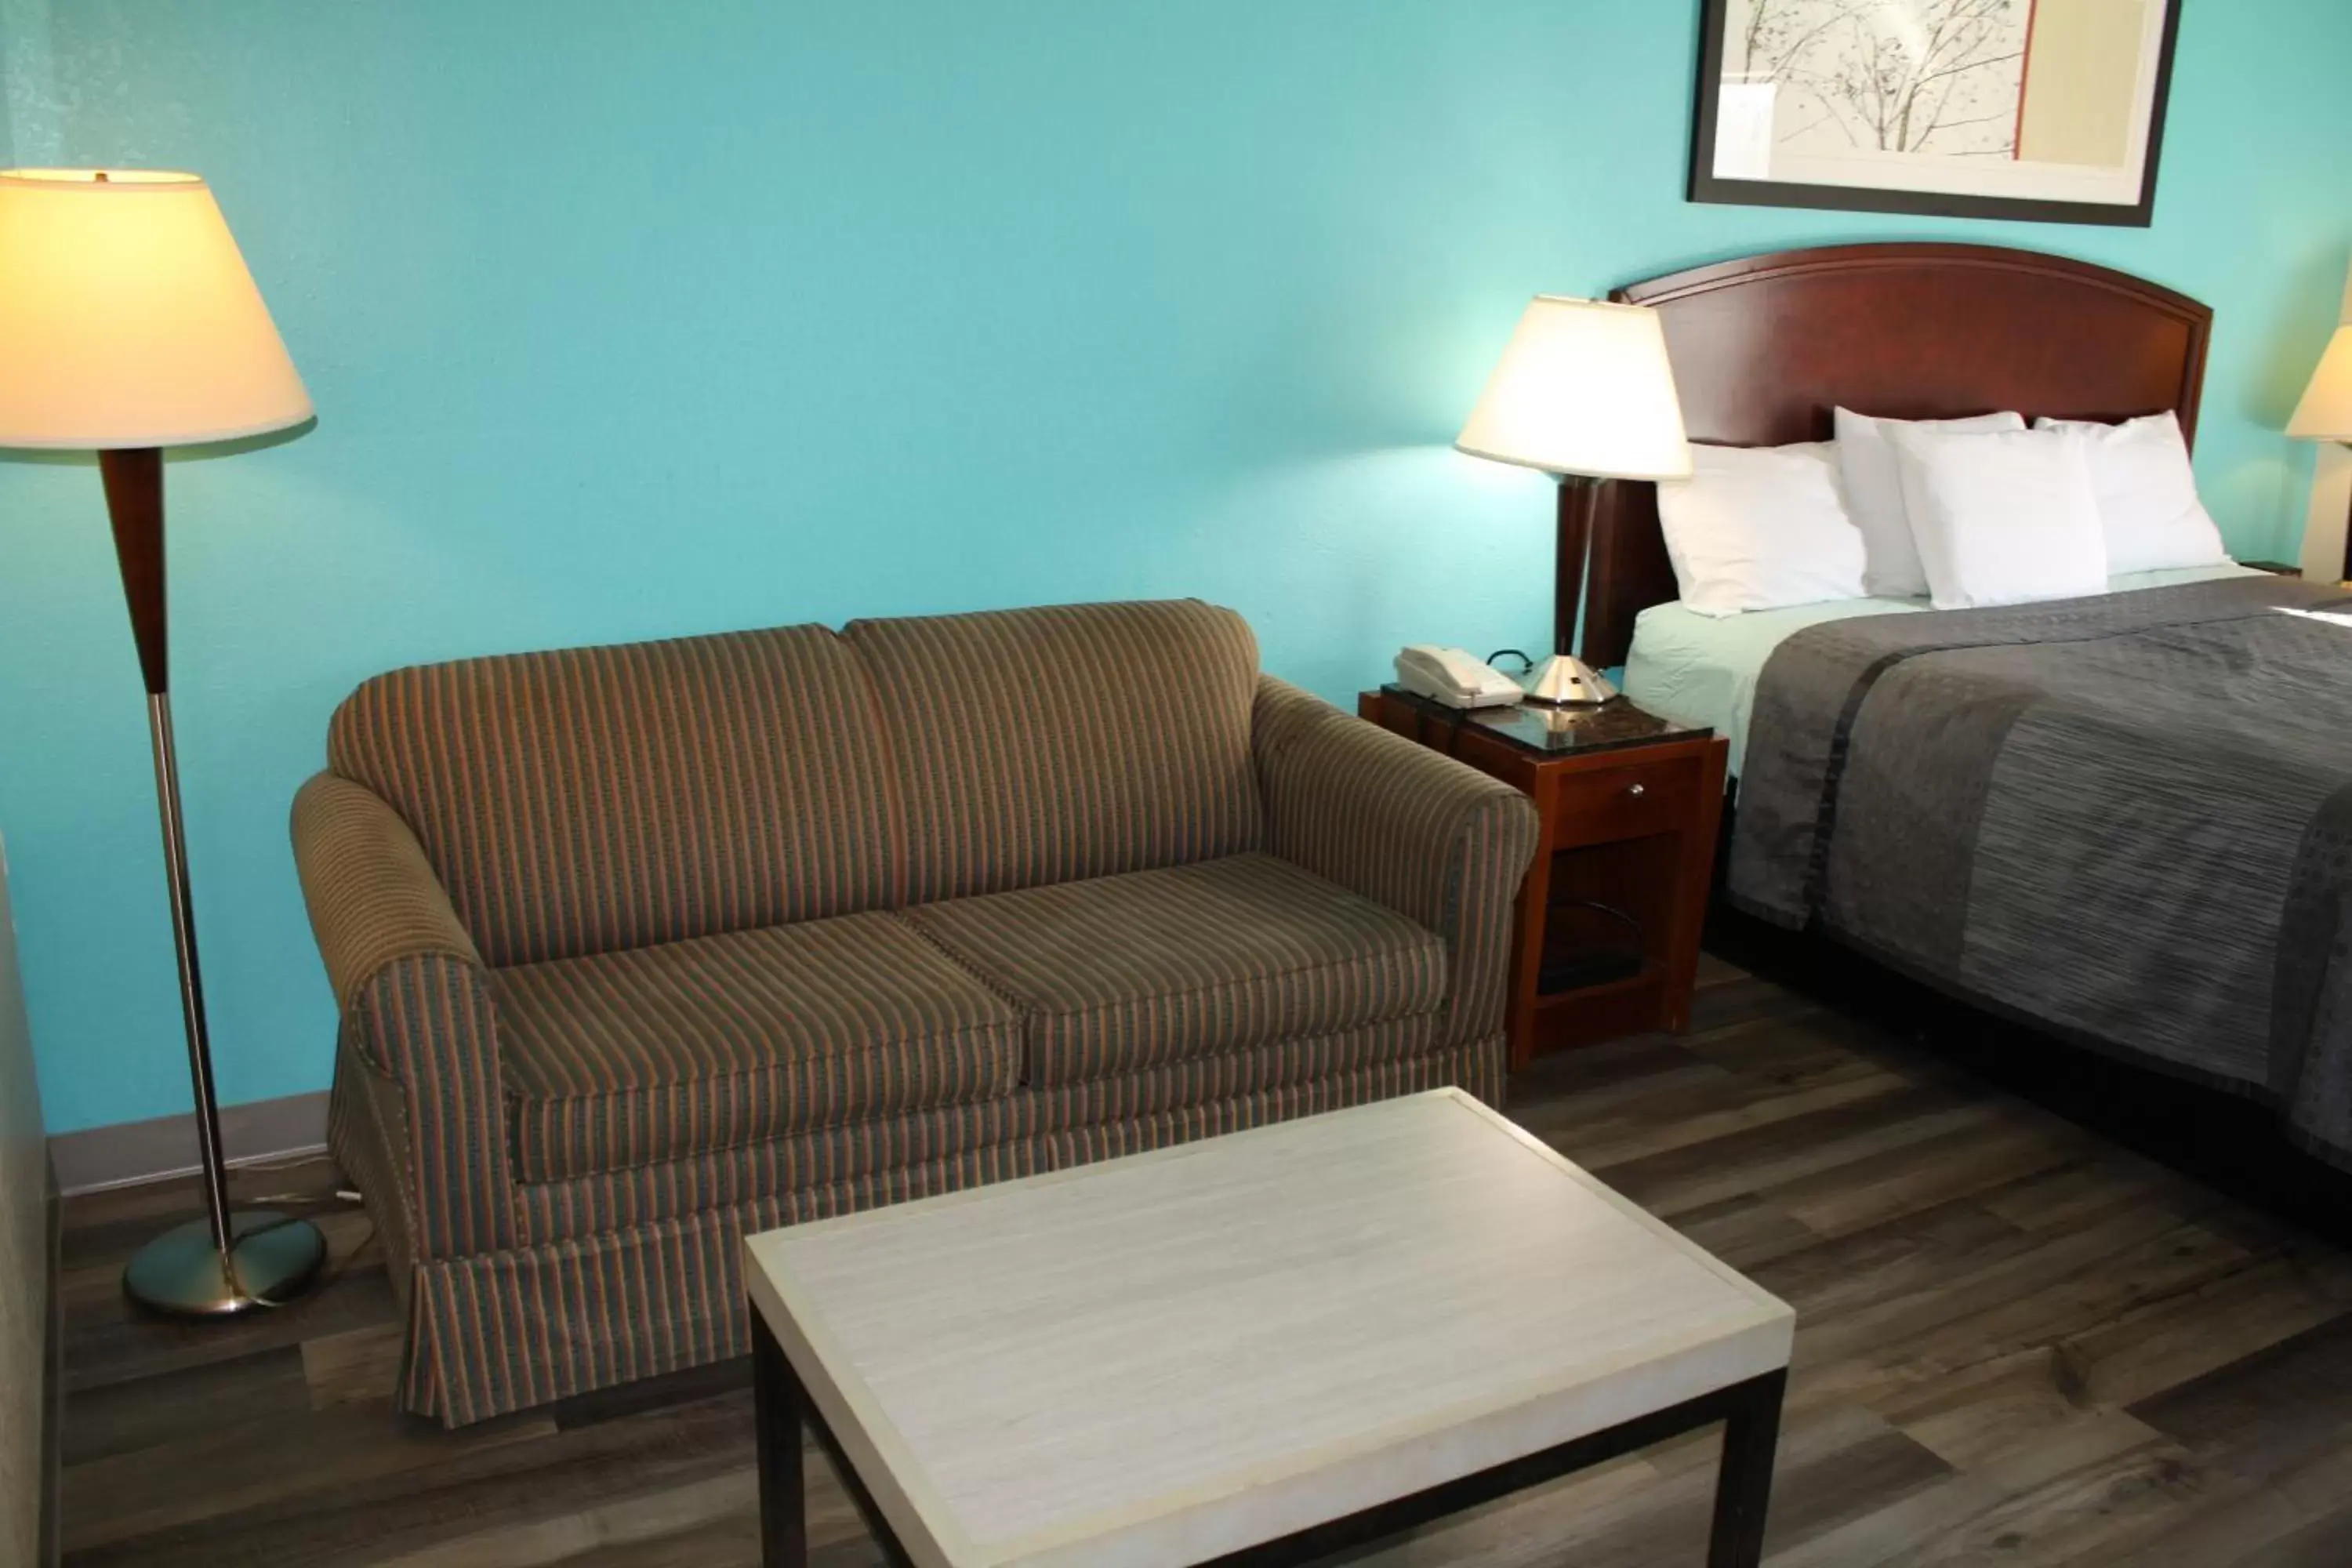 Property building in Executive Inn and Suites Wichita Falls